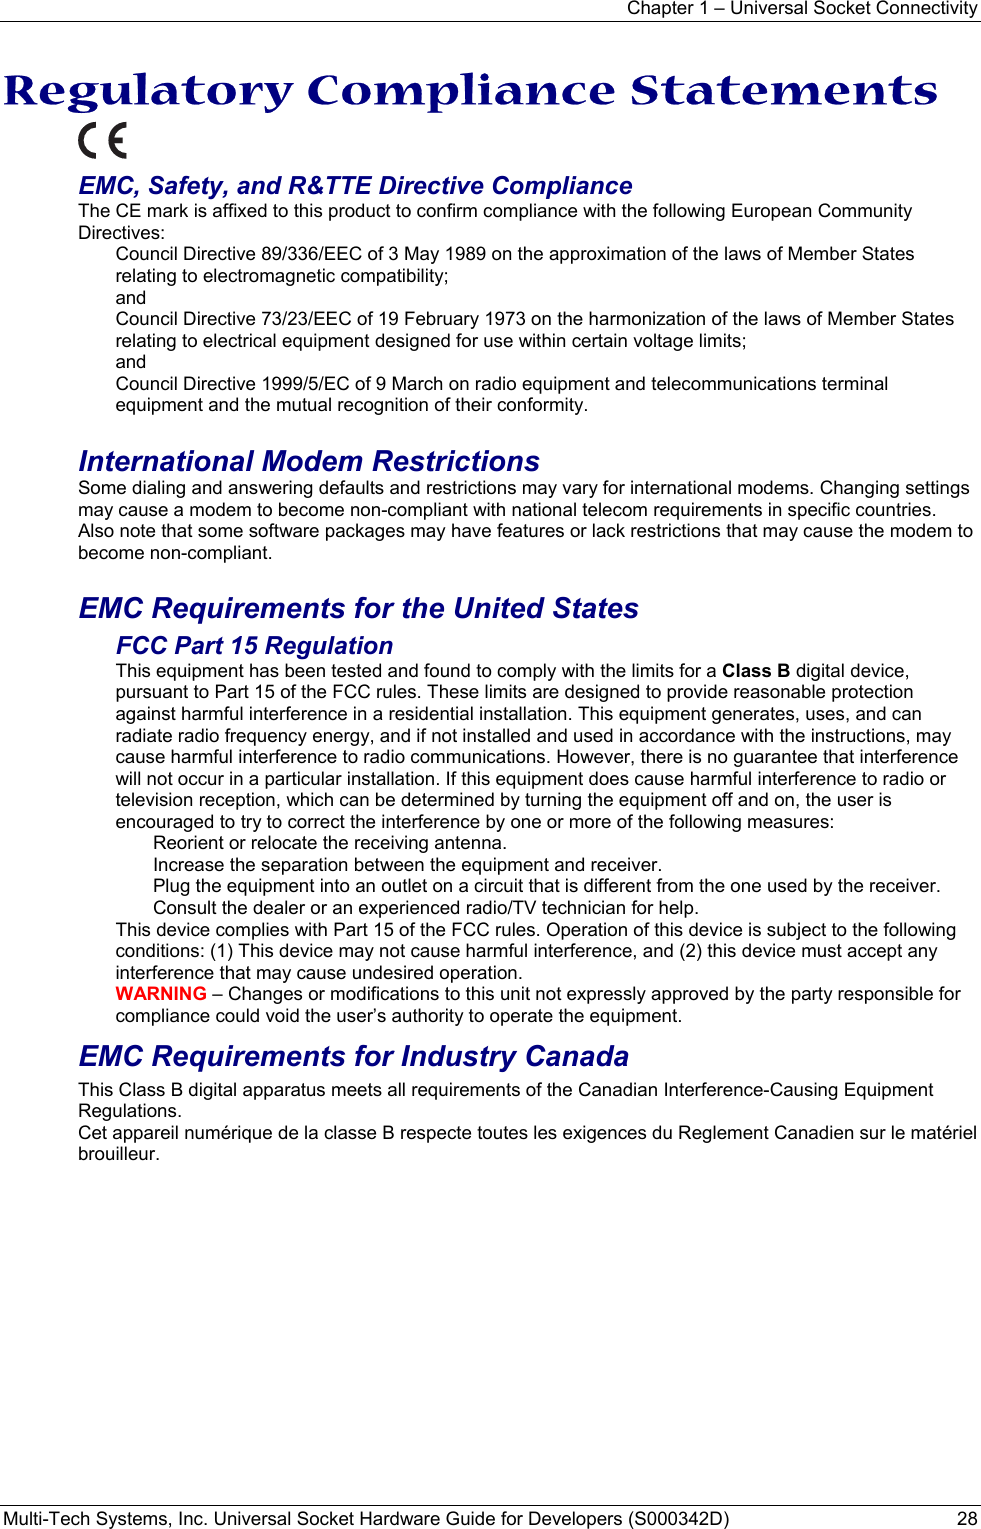 Chapter 1 – Universal Socket Connectivity Multi-Tech Systems, Inc. Universal Socket Hardware Guide for Developers (S000342D)  28  Regulatory Compliance Statements  EMC, Safety, and R&amp;TTE Directive Compliance The CE mark is affixed to this product to confirm compliance with the following European Community Directives: Council Directive 89/336/EEC of 3 May 1989 on the approximation of the laws of Member States relating to electromagnetic compatibility;  and Council Directive 73/23/EEC of 19 February 1973 on the harmonization of the laws of Member States relating to electrical equipment designed for use within certain voltage limits; and Council Directive 1999/5/EC of 9 March on radio equipment and telecommunications terminal equipment and the mutual recognition of their conformity.   International Modem Restrictions Some dialing and answering defaults and restrictions may vary for international modems. Changing settings may cause a modem to become non-compliant with national telecom requirements in specific countries. Also note that some software packages may have features or lack restrictions that may cause the modem to become non-compliant.  EMC Requirements for the United States FCC Part 15 Regulation This equipment has been tested and found to comply with the limits for a Class B digital device, pursuant to Part 15 of the FCC rules. These limits are designed to provide reasonable protection against harmful interference in a residential installation. This equipment generates, uses, and can radiate radio frequency energy, and if not installed and used in accordance with the instructions, may cause harmful interference to radio communications. However, there is no guarantee that interference will not occur in a particular installation. If this equipment does cause harmful interference to radio or television reception, which can be determined by turning the equipment off and on, the user is encouraged to try to correct the interference by one or more of the following measures: Reorient or relocate the receiving antenna. Increase the separation between the equipment and receiver. Plug the equipment into an outlet on a circuit that is different from the one used by the receiver. Consult the dealer or an experienced radio/TV technician for help. This device complies with Part 15 of the FCC rules. Operation of this device is subject to the following conditions: (1) This device may not cause harmful interference, and (2) this device must accept any interference that may cause undesired operation. WARNING – Changes or modifications to this unit not expressly approved by the party responsible for compliance could void the user’s authority to operate the equipment. EMC Requirements for Industry Canada This Class B digital apparatus meets all requirements of the Canadian Interference-Causing Equipment Regulations. Cet appareil numérique de la classe B respecte toutes les exigences du Reglement Canadien sur le matériel brouilleur. 